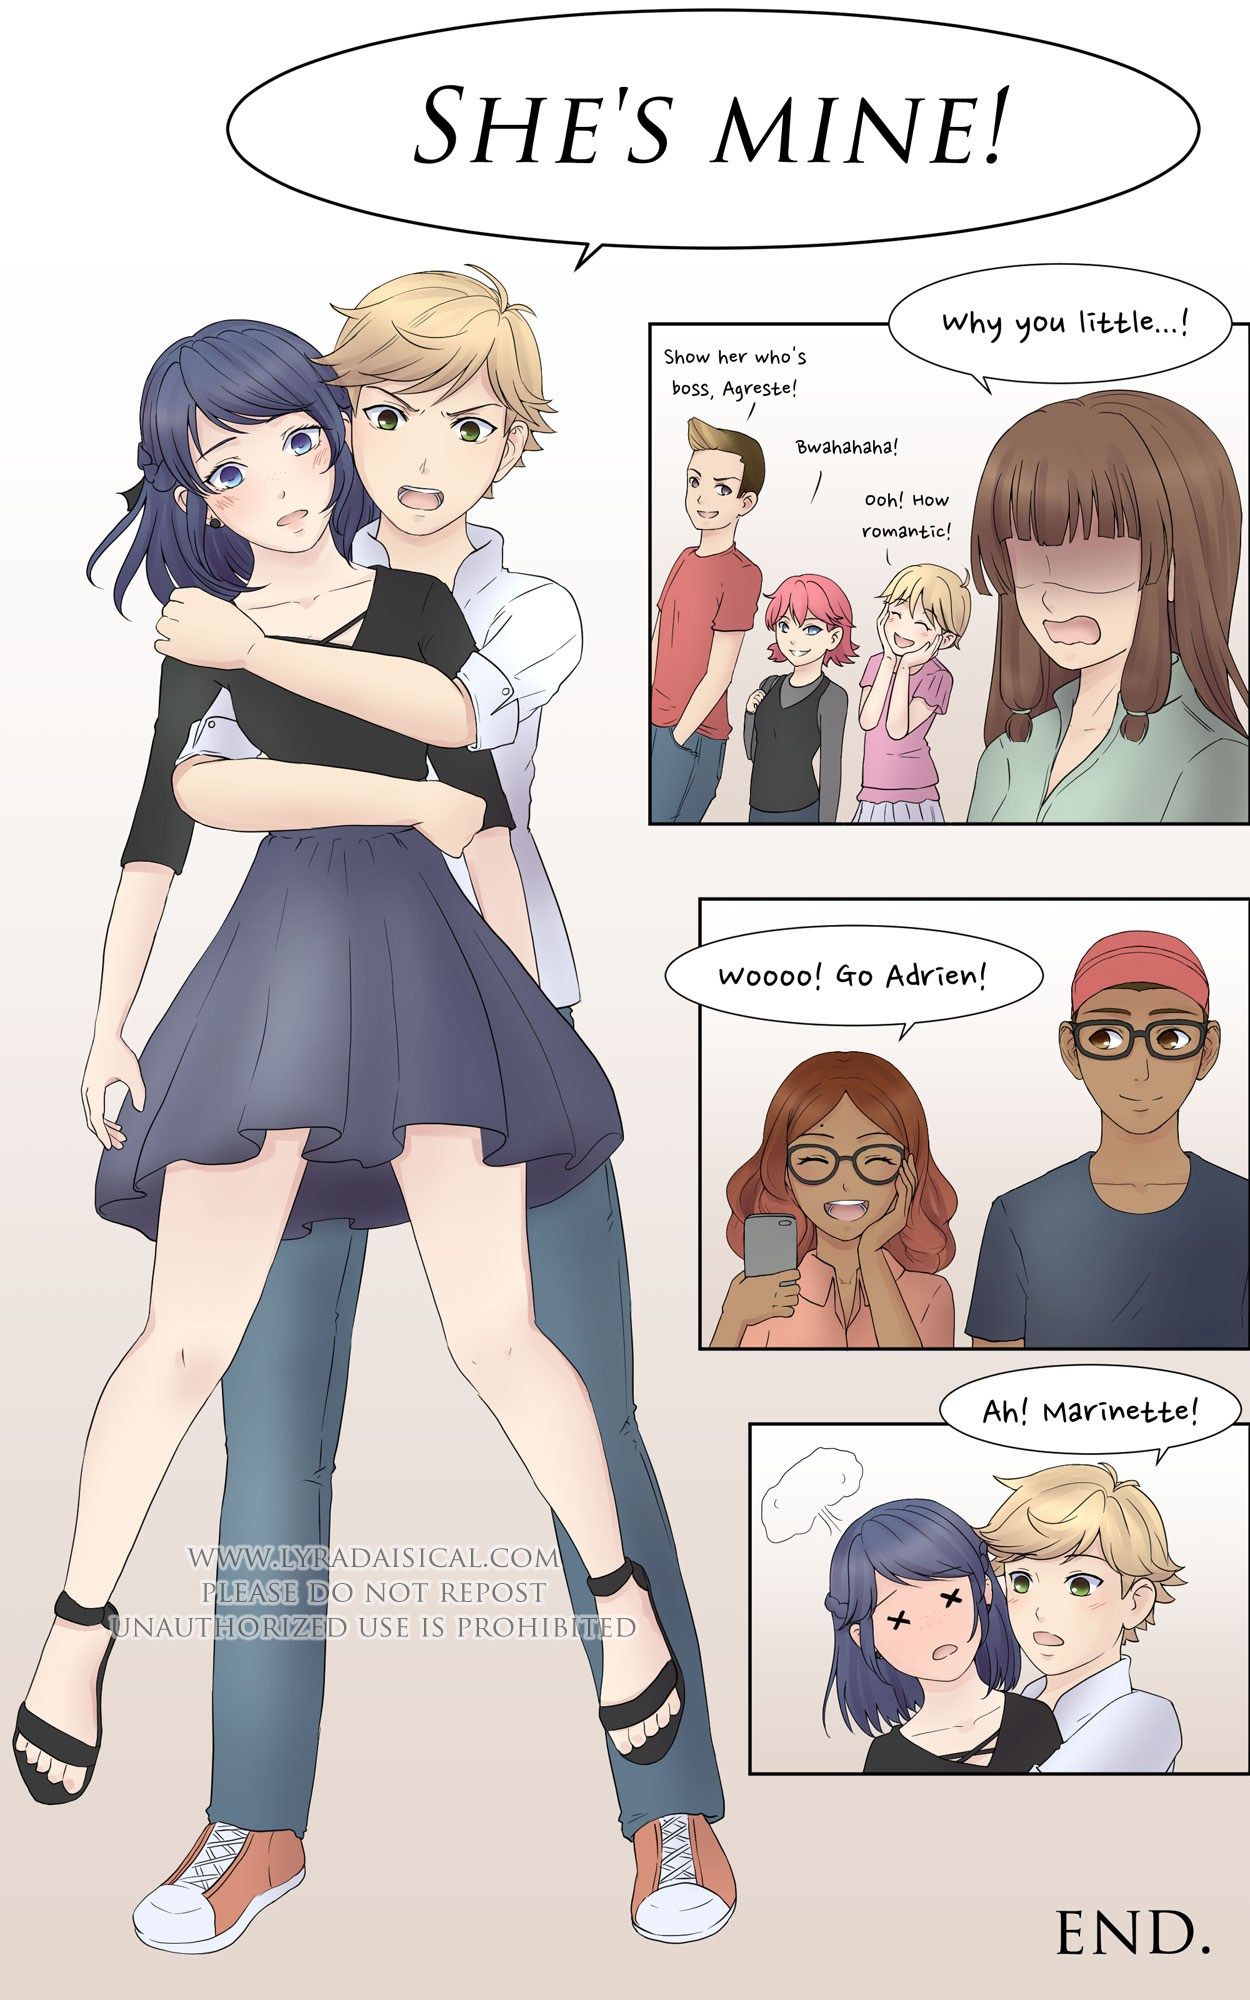 Shes Mine Was My First “long” Fan Comic For Miraculous And It Was